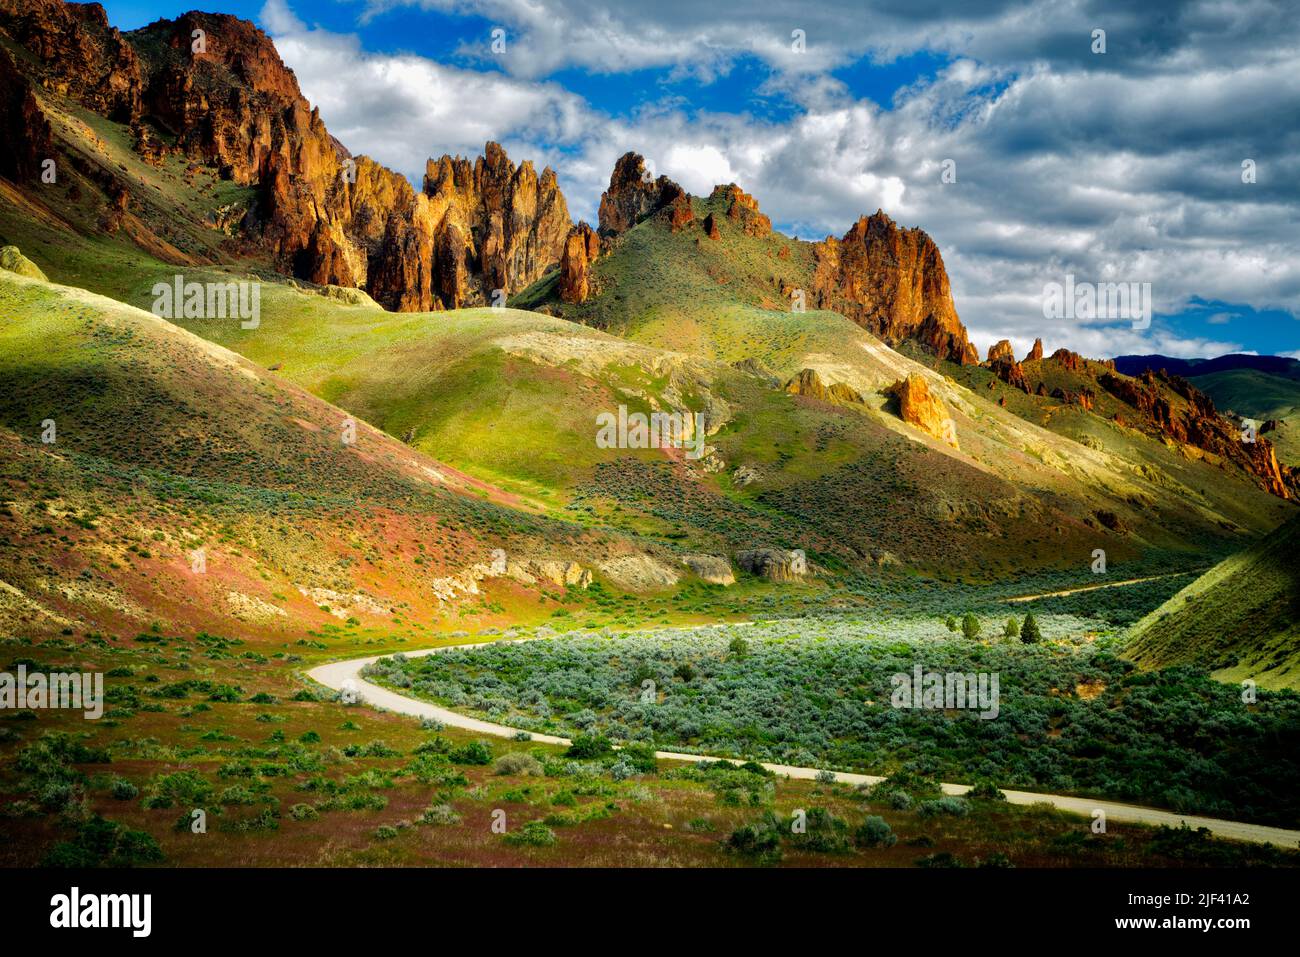 Road and rock formations in Leslie Gultch, Malhuer County, Oregon Stock Photo